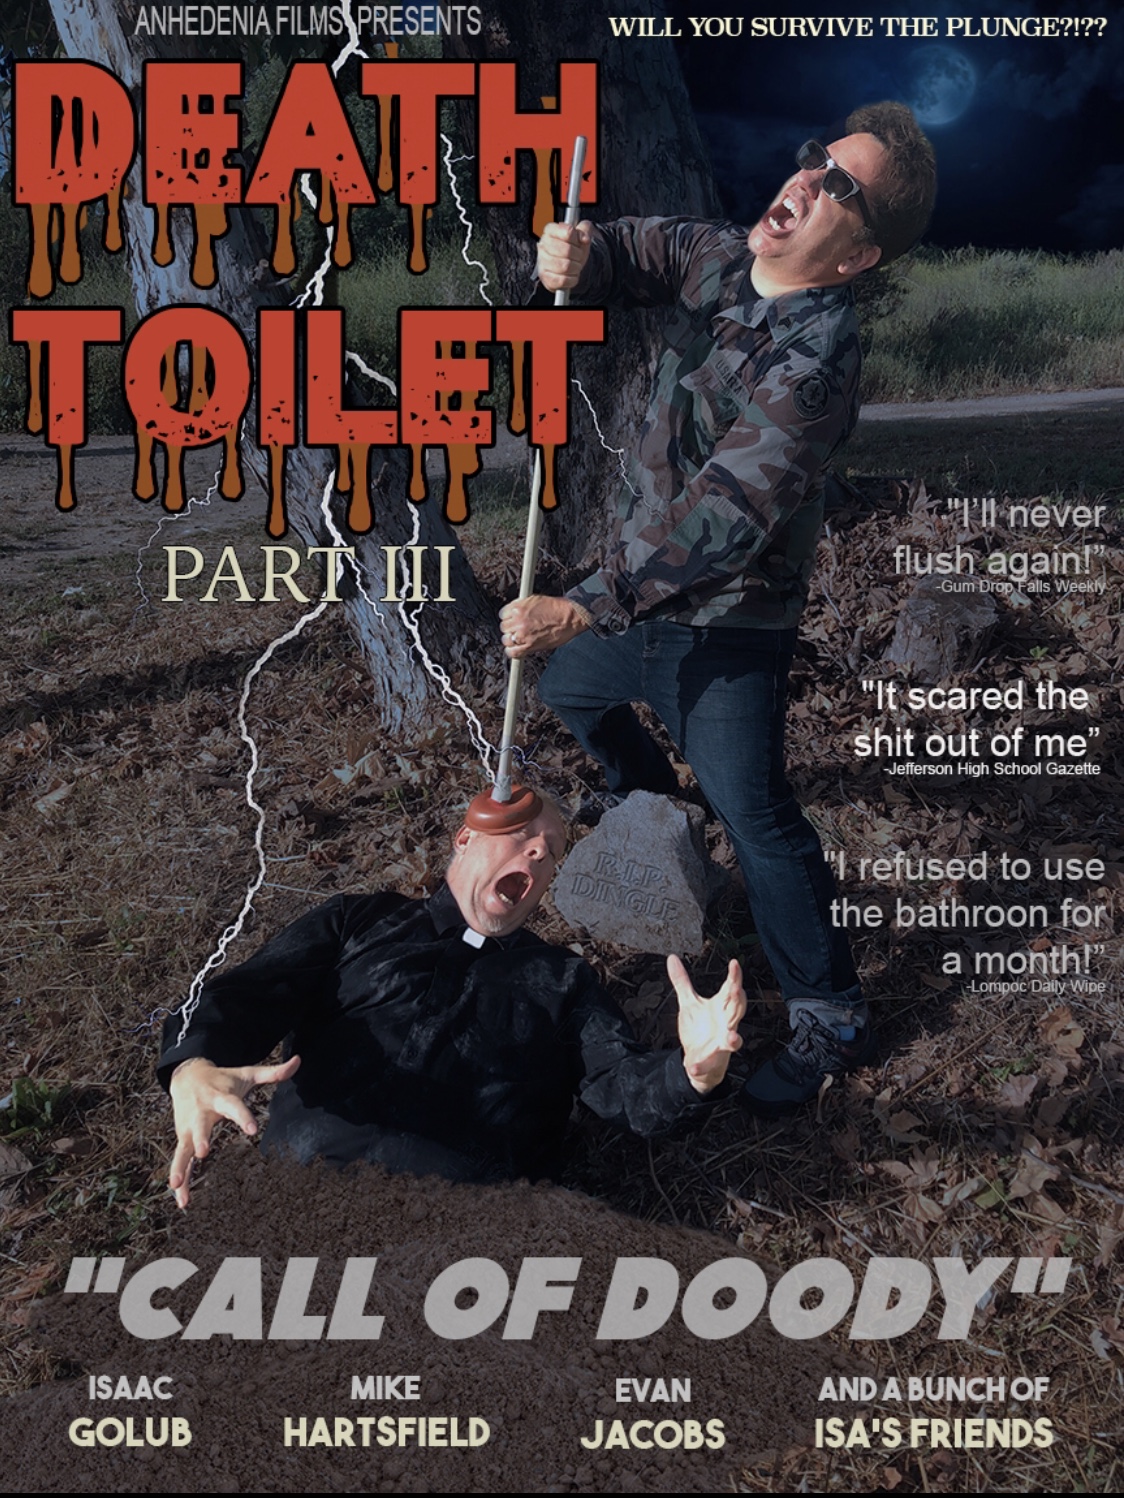 Death Toilet 3: Call of Doody (2020)